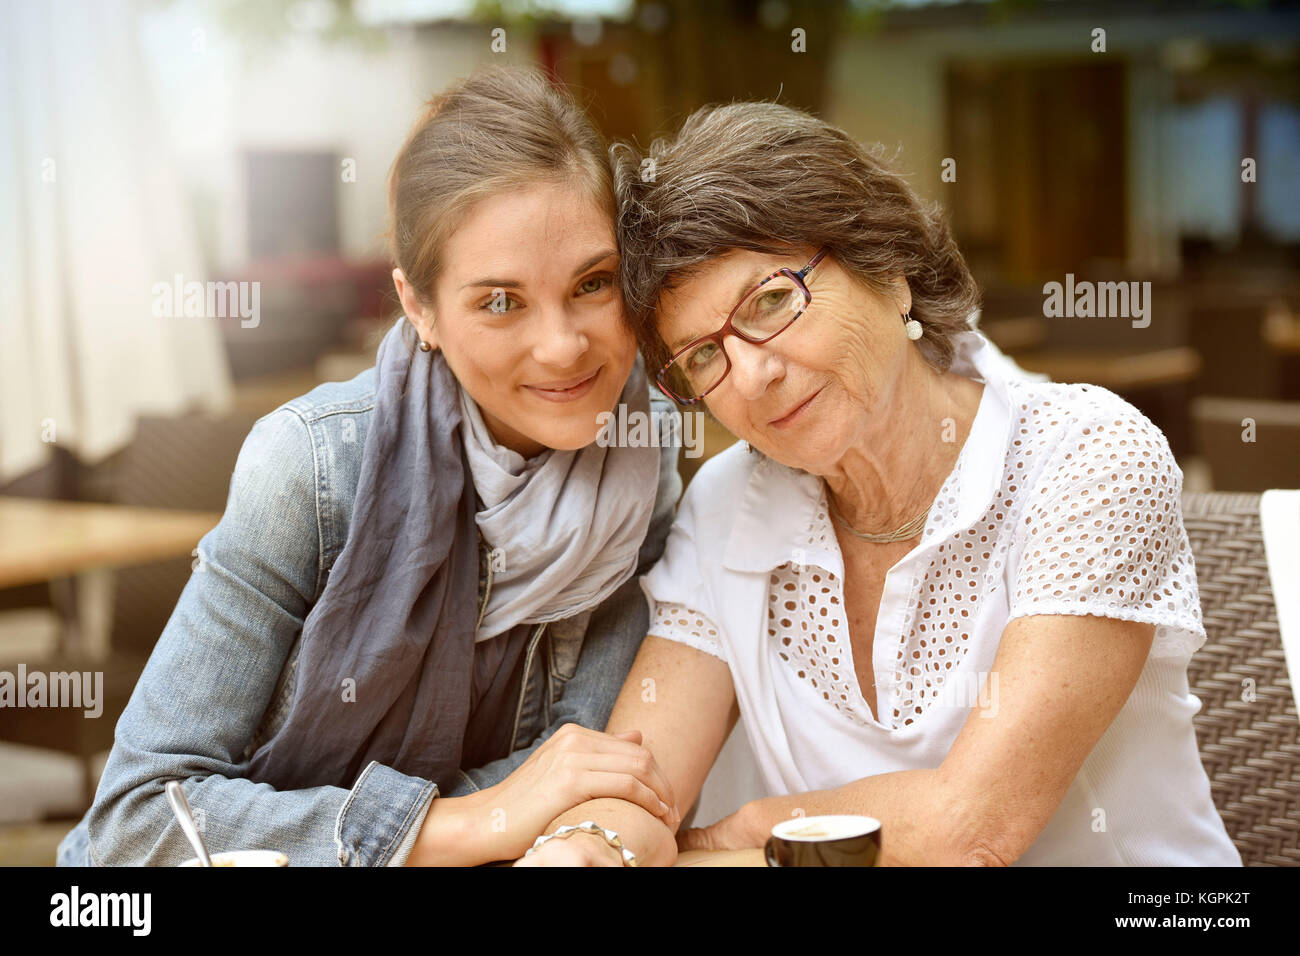 Portrait of elderly woman with home carer Stock Photo